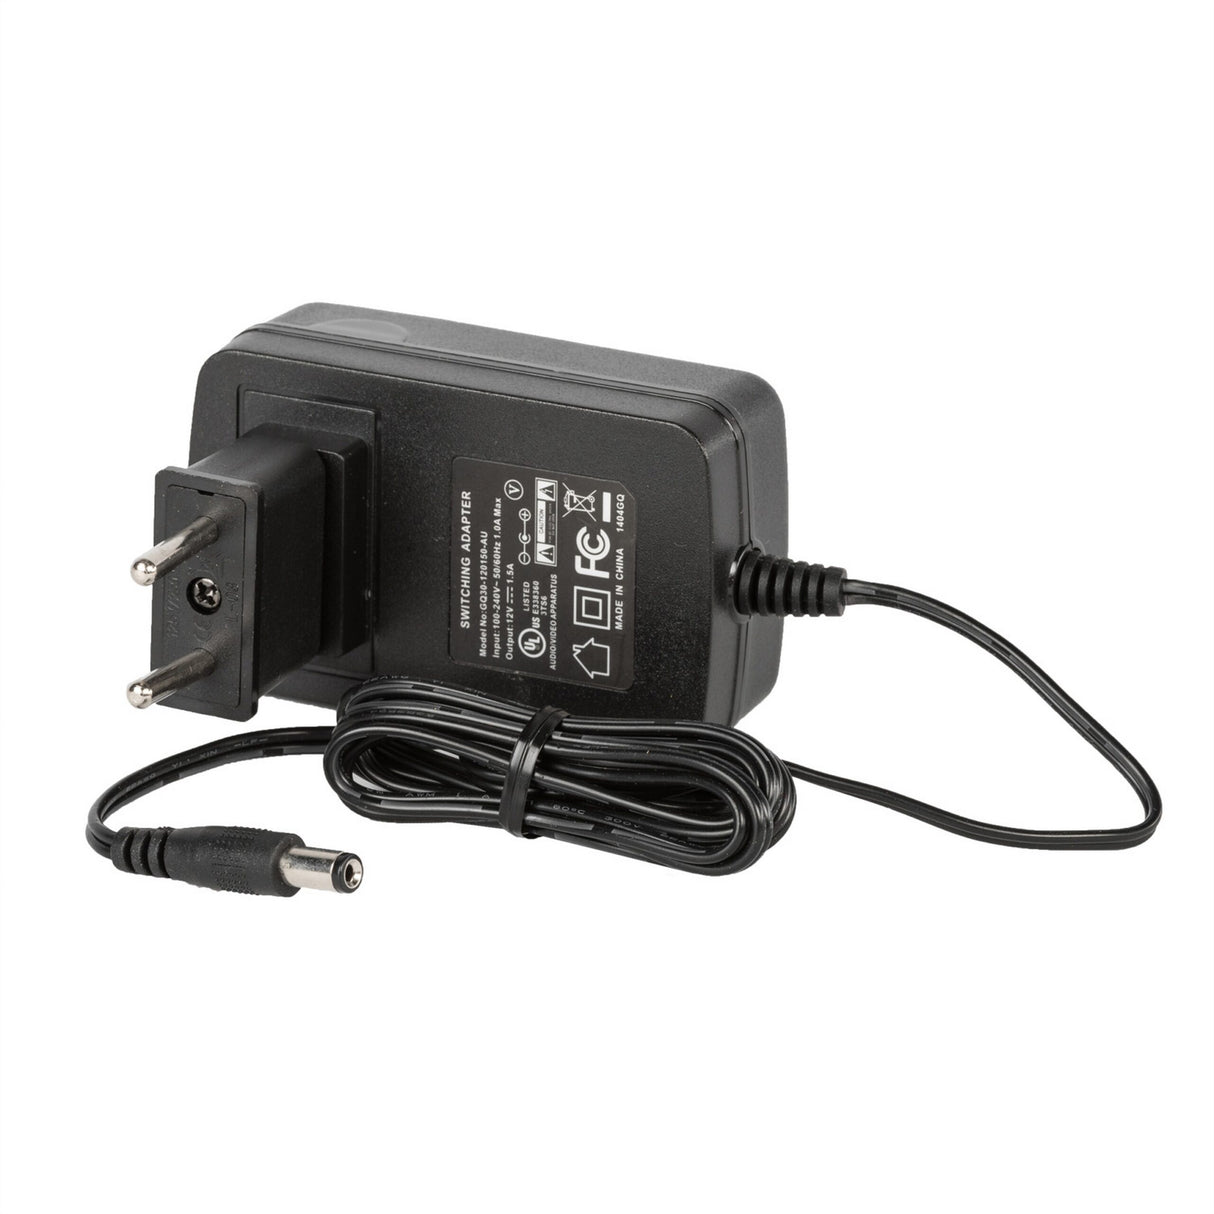 Ikan AC-12V-1.5A-TypeC 12 Volt, 1.5 Amp AC/DC Adapter for Europe